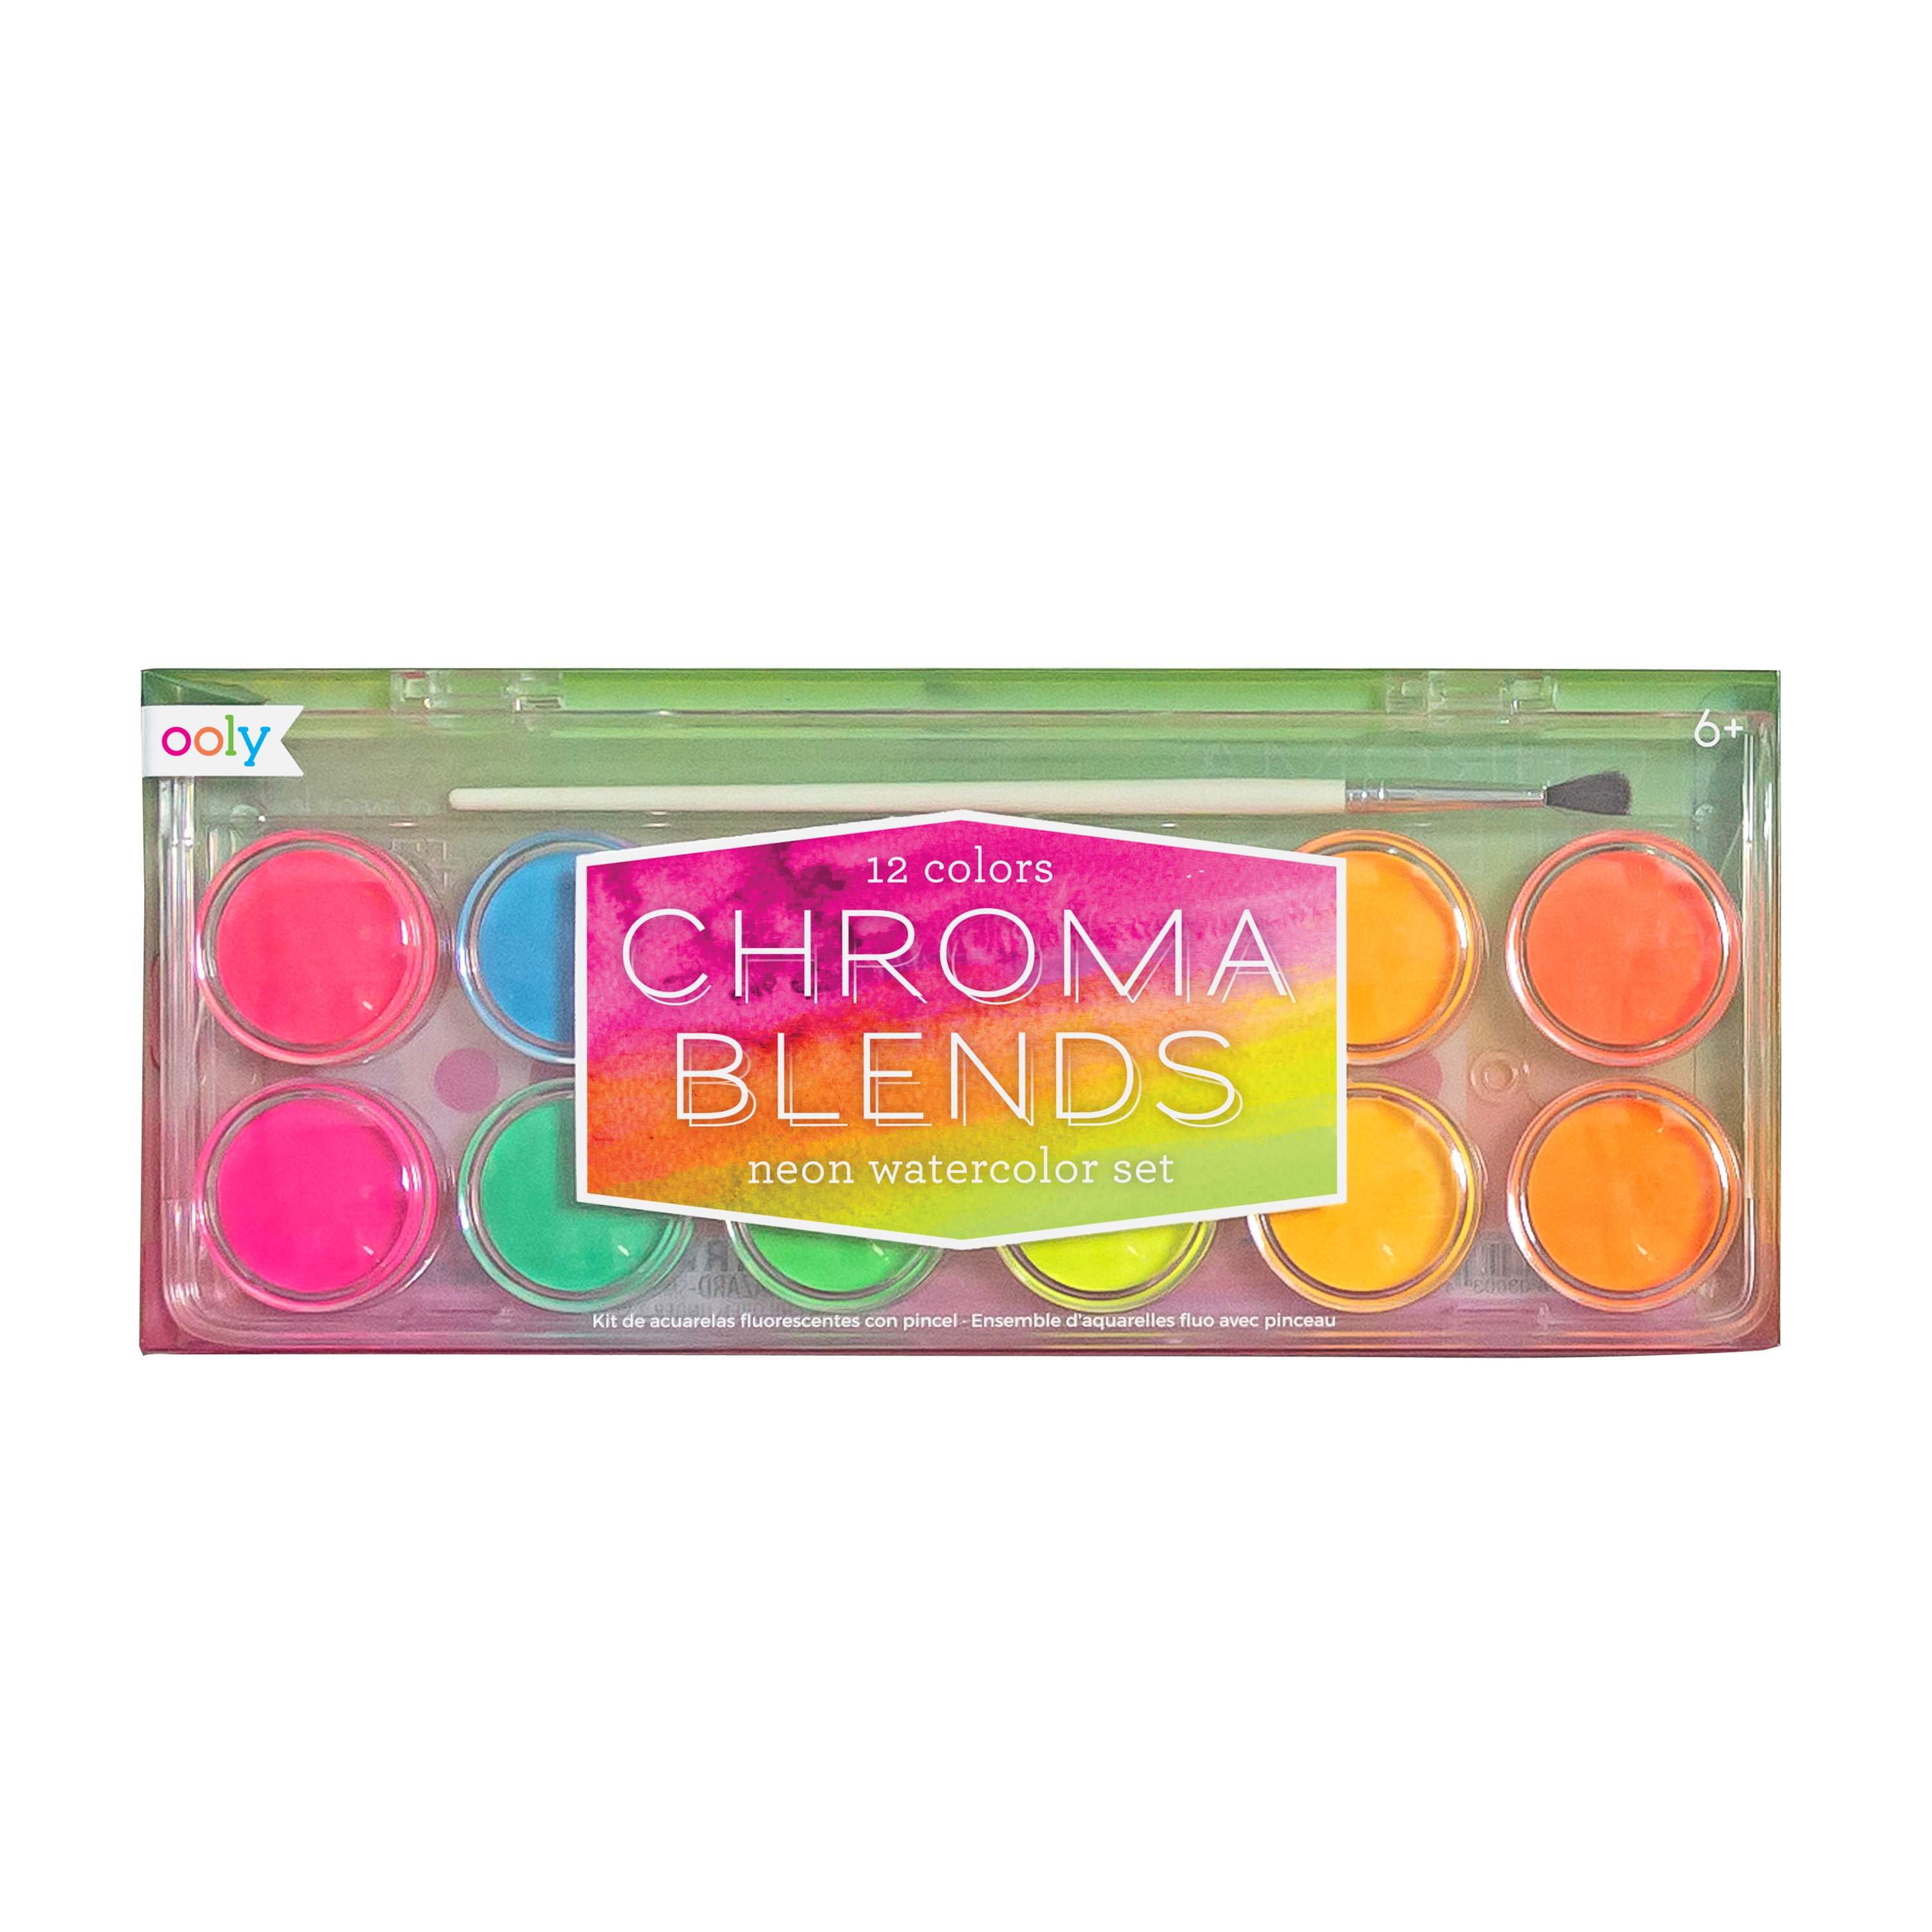 QoR Watercolor Introductory Set 6-Color High Chroma Set